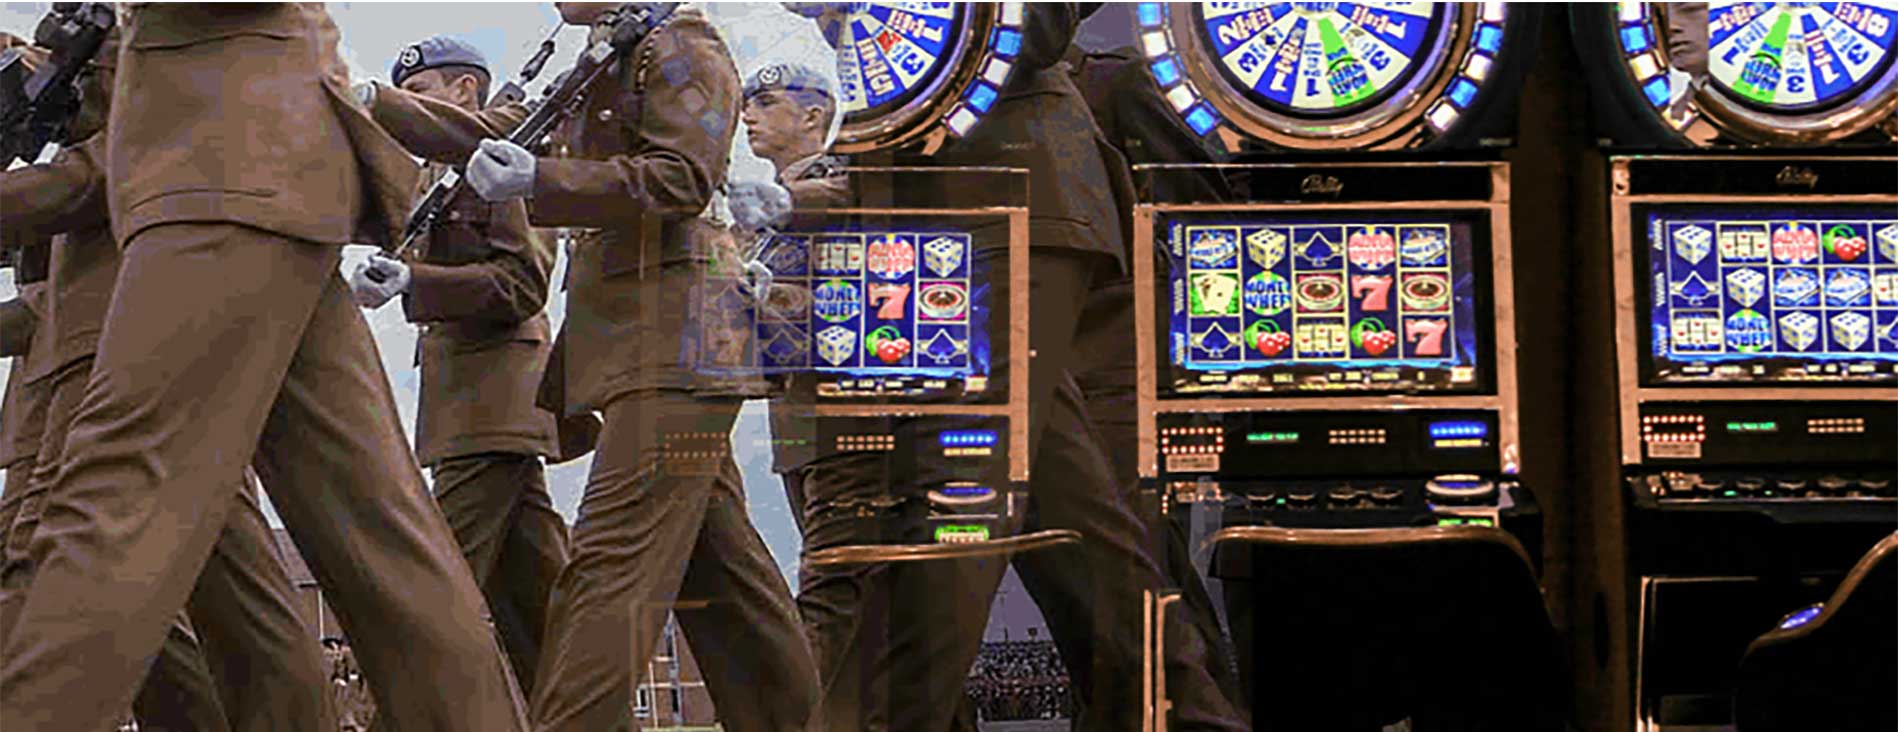 veterans walking blended with image of slot machines